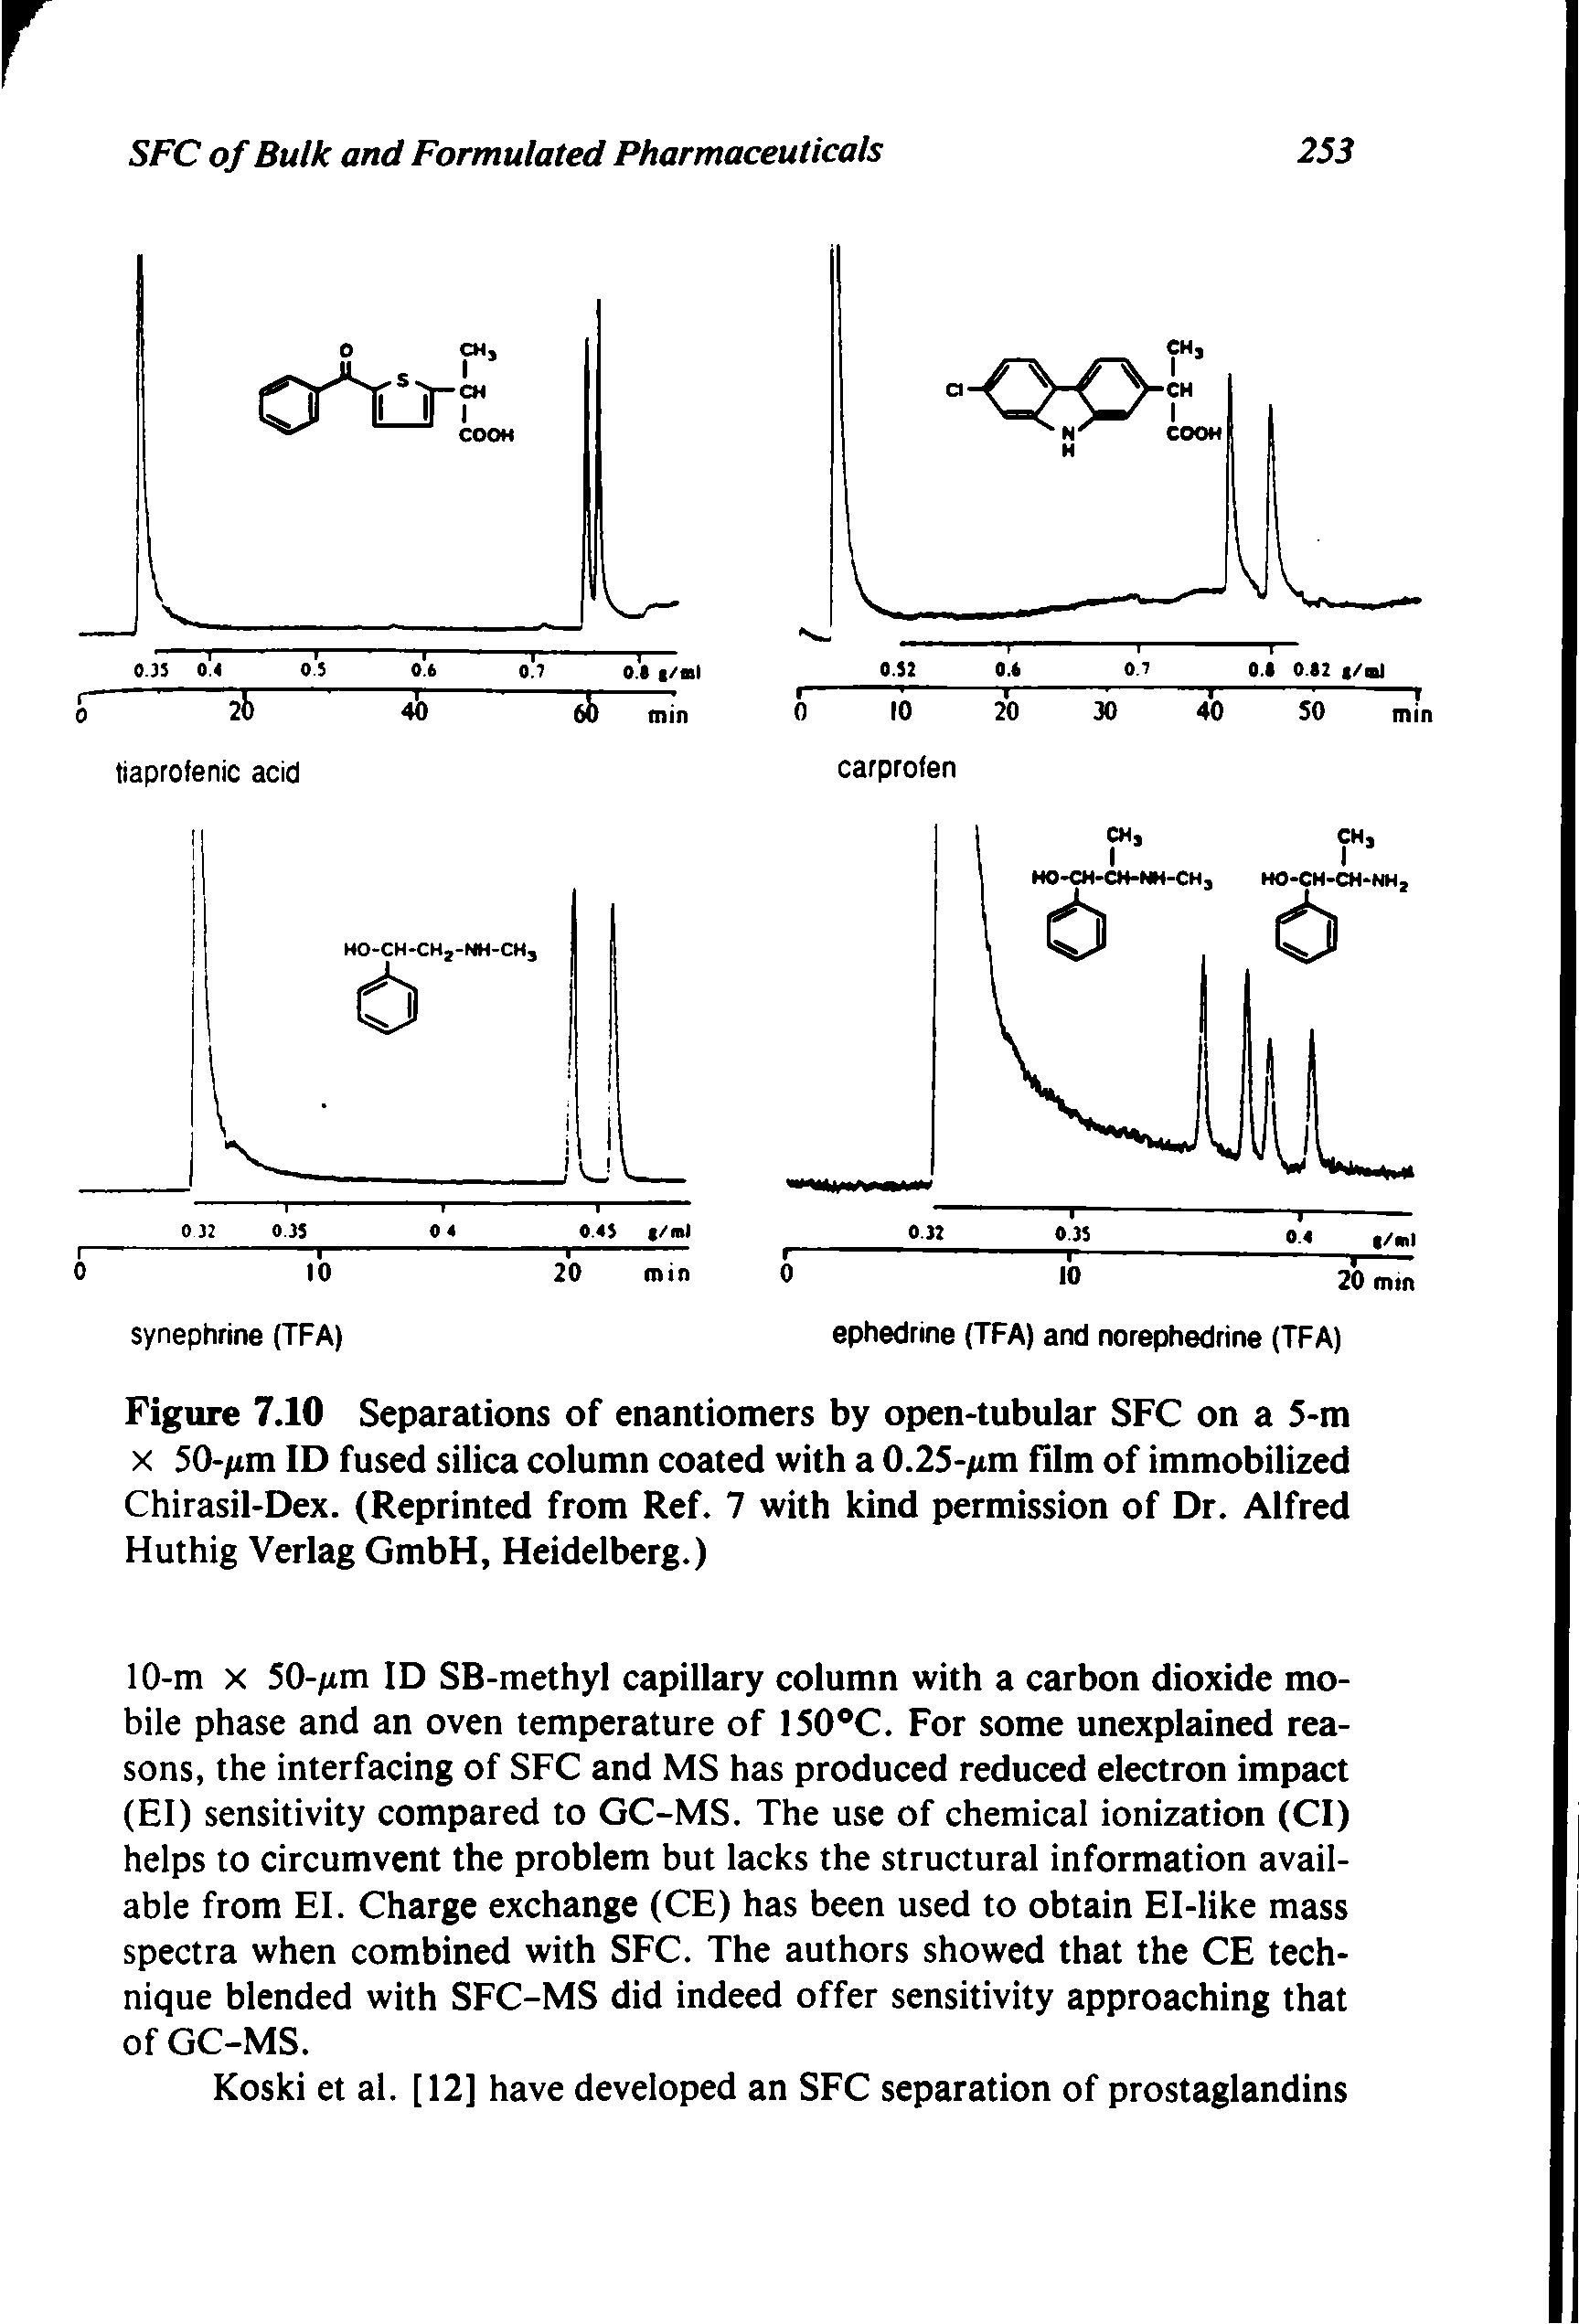 Figure 7.10 Separations of enantiomers by open-tubular SFC on a 5-m x 50-/xm ID fused silica column coated with a 0.25- m film of immobilized Chirasil-Dex. (Reprinted from Ref. 7 with kind permission of Dr. Alfred Huthig Verlag GmbH, Heidelberg.)...